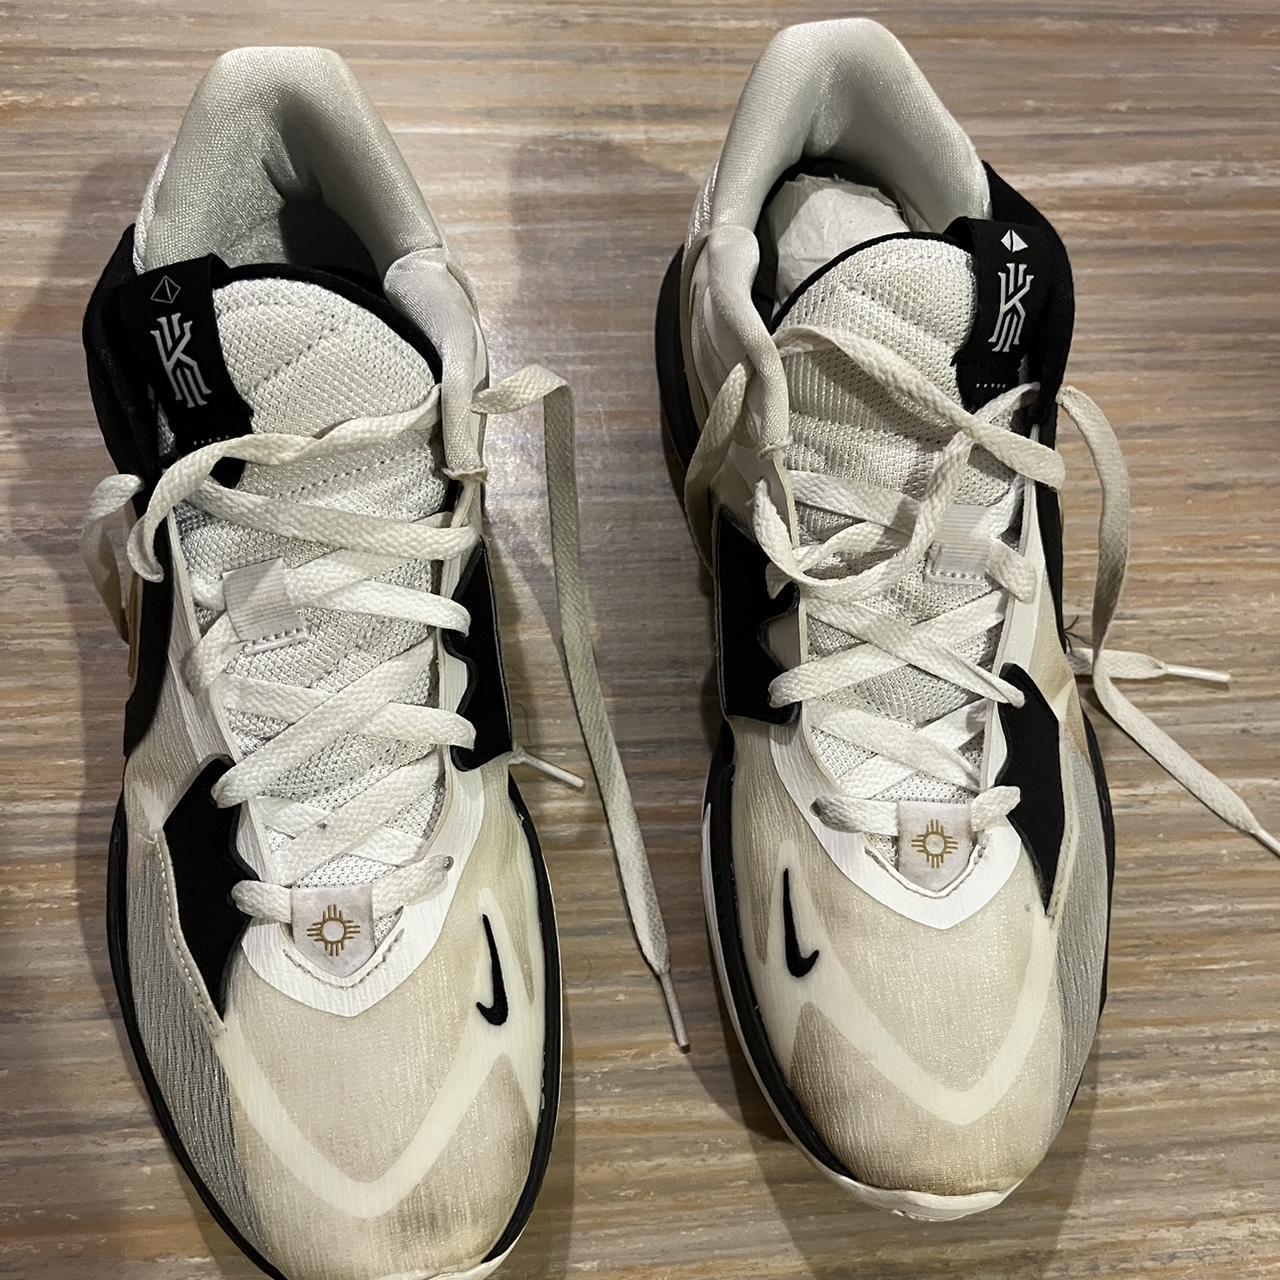 Kyrie 5 low Great basketball shoes - Depop